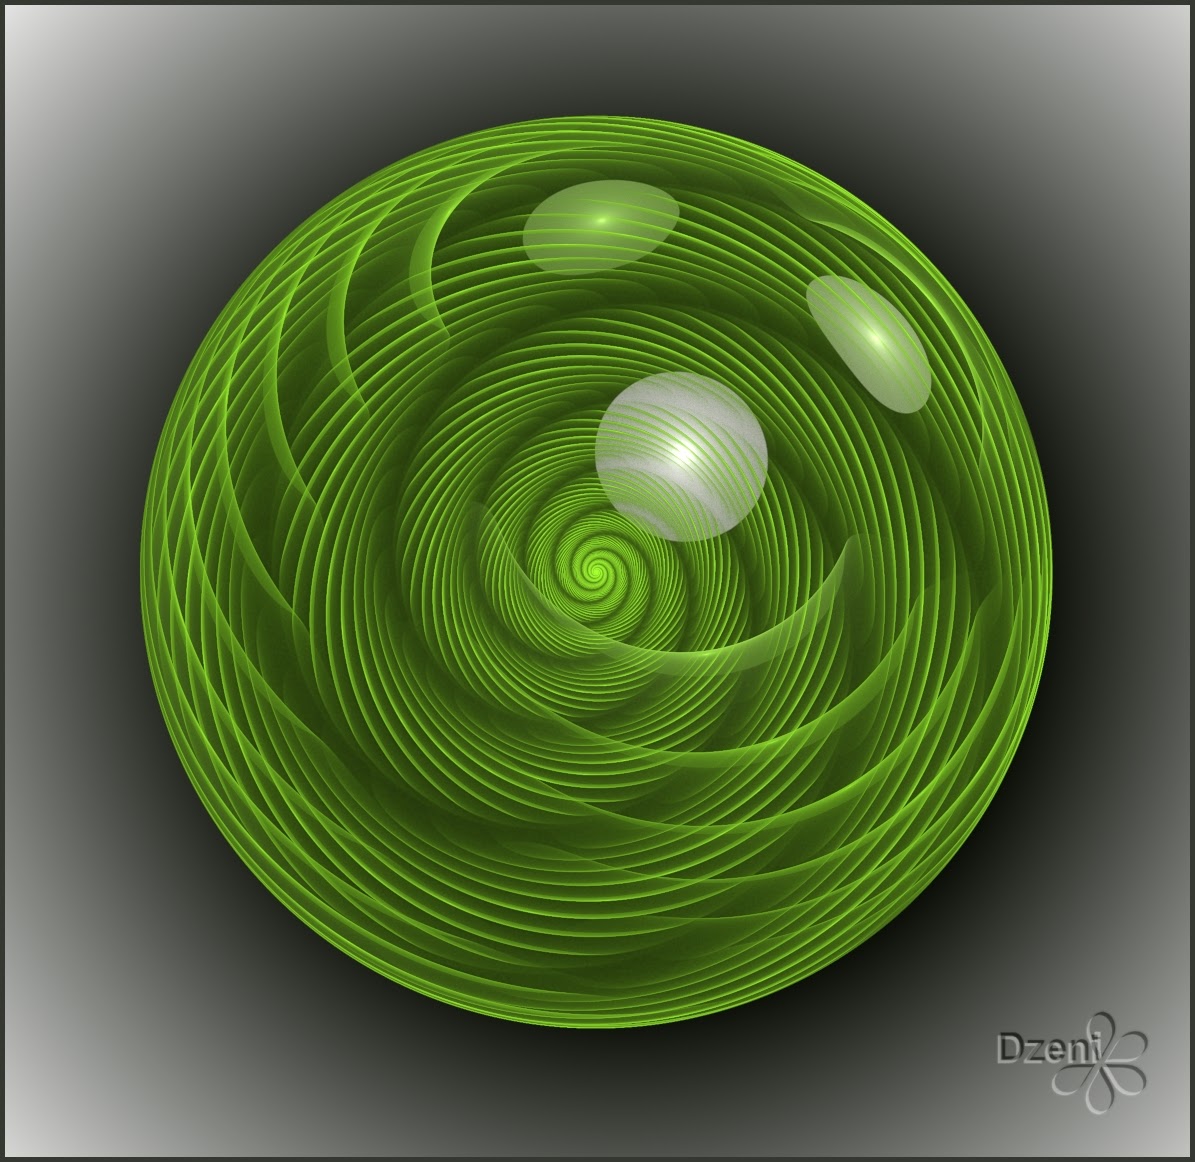 Read more about the article Jade Sphere